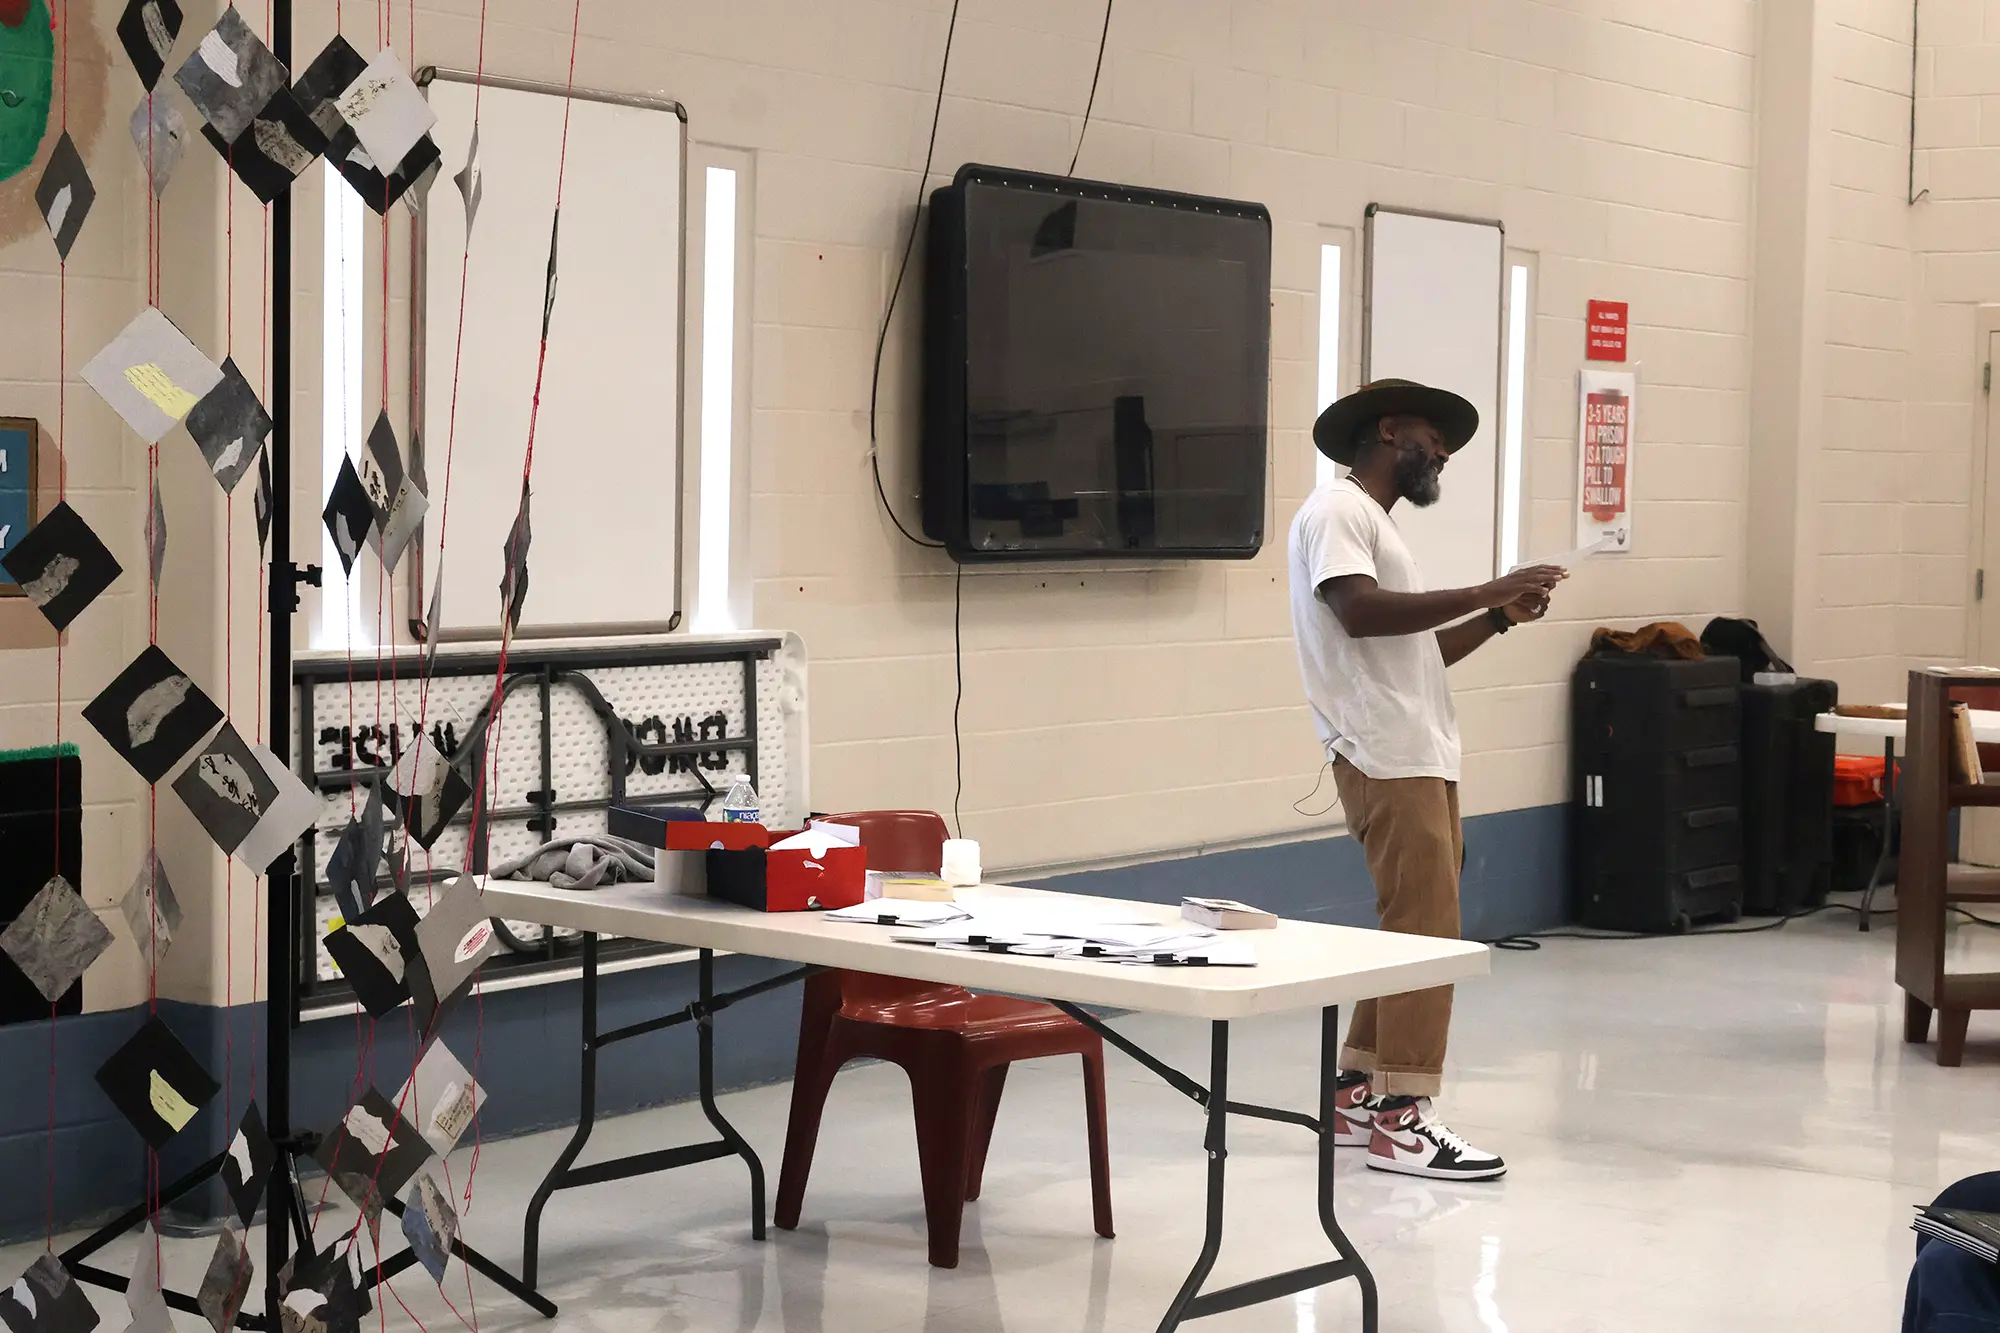 Reginald Dwayne Betts performs among institutional table and chairs between hanging works made from traditional Japanese washi paper as well as a wooden Freedom Library bookcase at Dillwyn Correctional Center in Virginia.